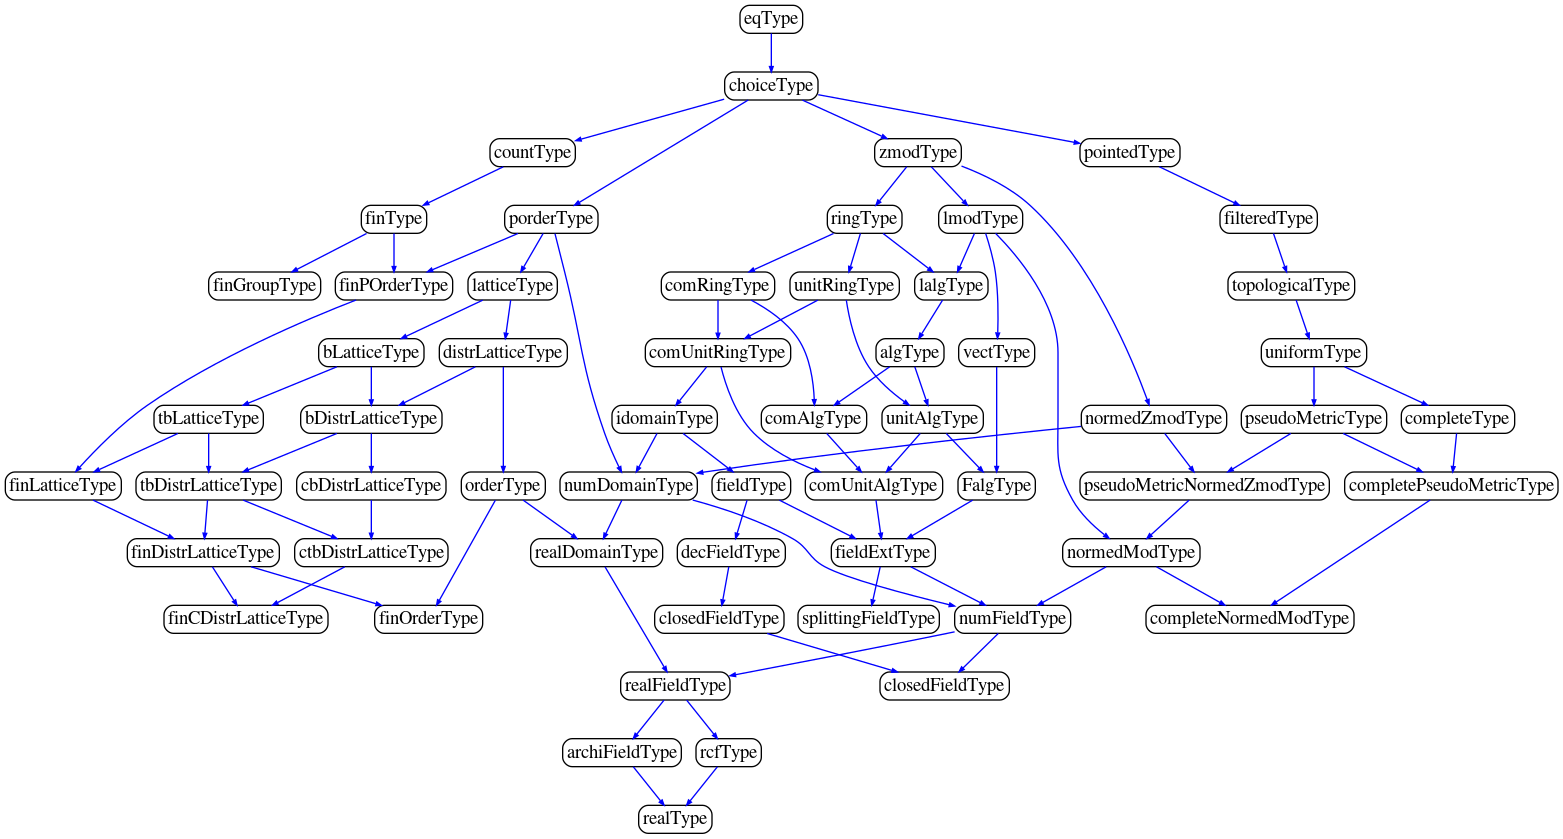 Dependency graph of real numbers in
mathcomp-analysis